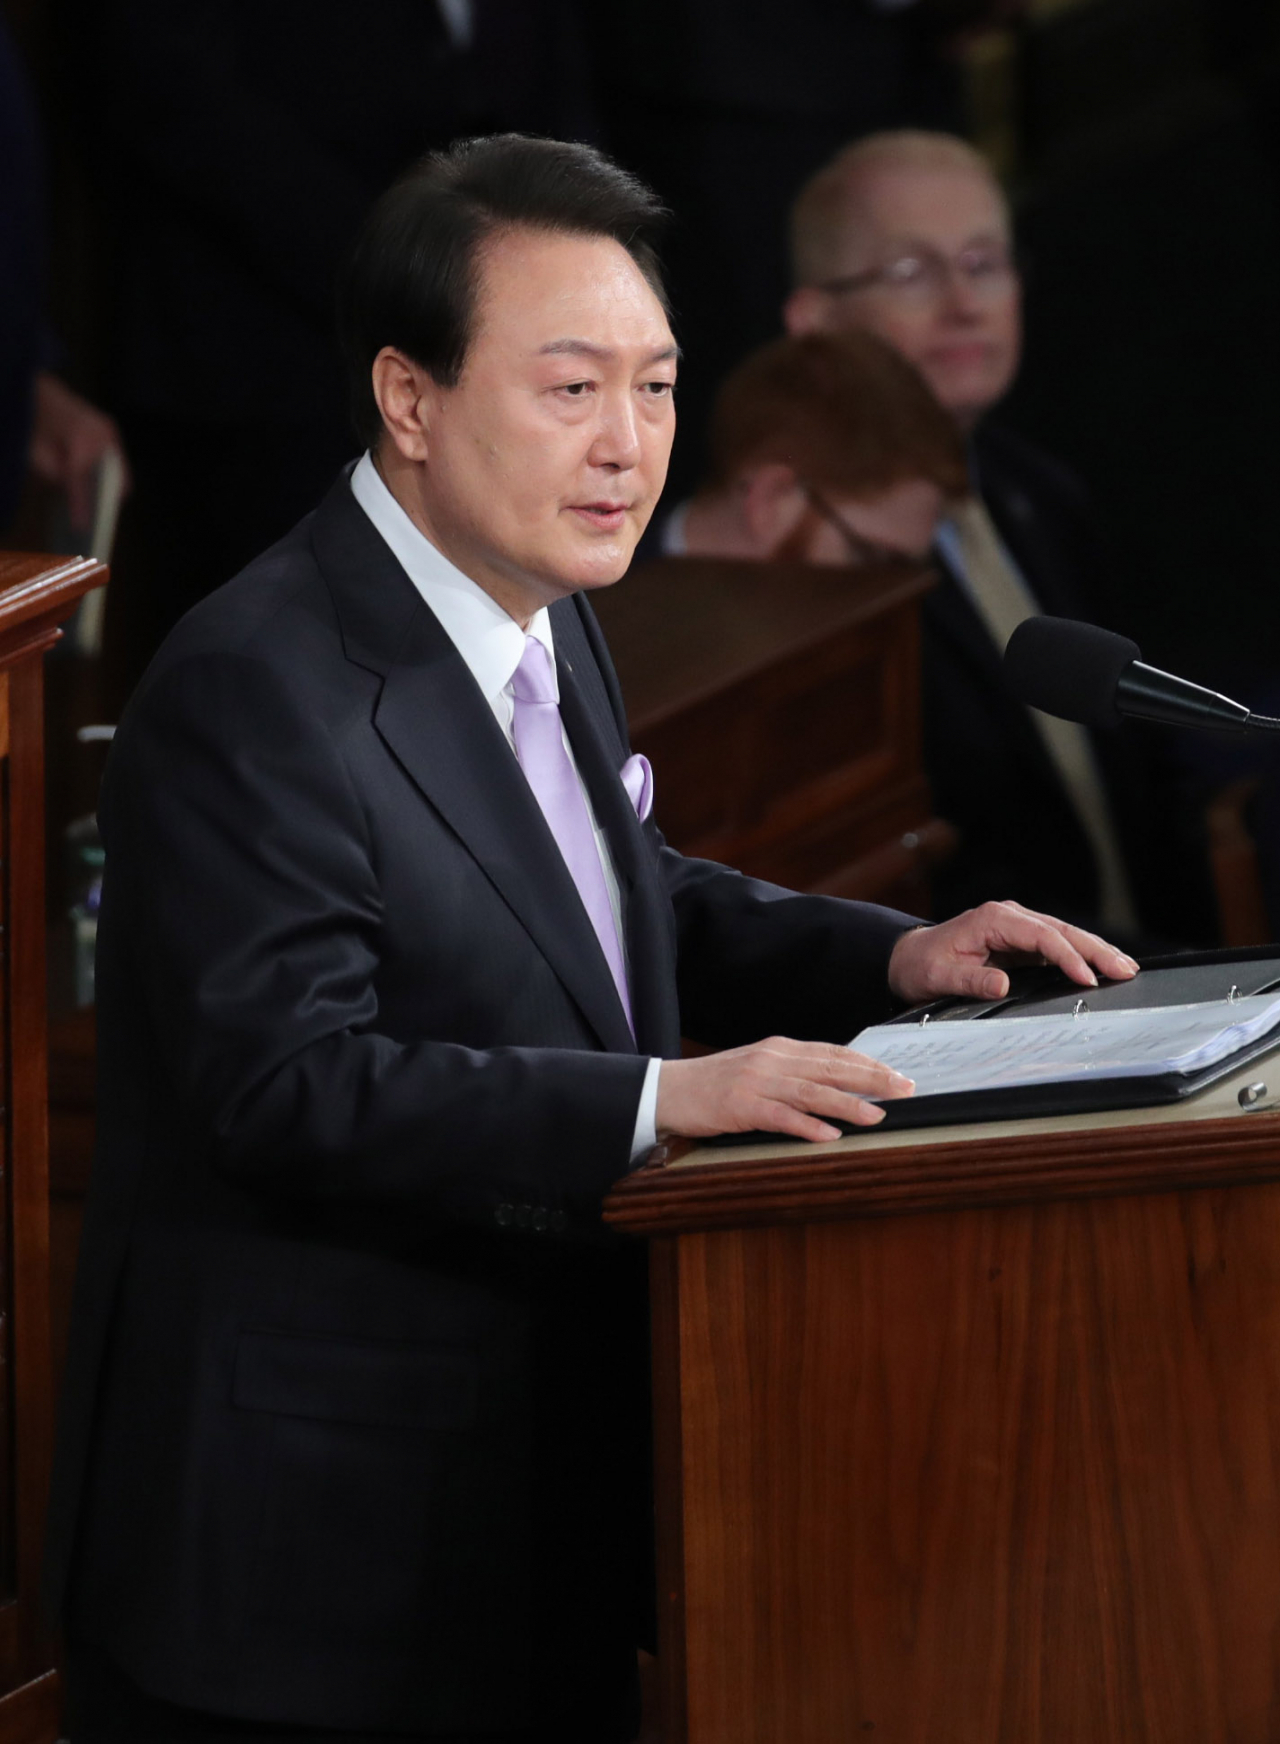 South Korean President Yoon Suk Yeol addresses a joint session of Congress in the House Chamber of the US Capitol in Washington last Thursday. (Yonhap)